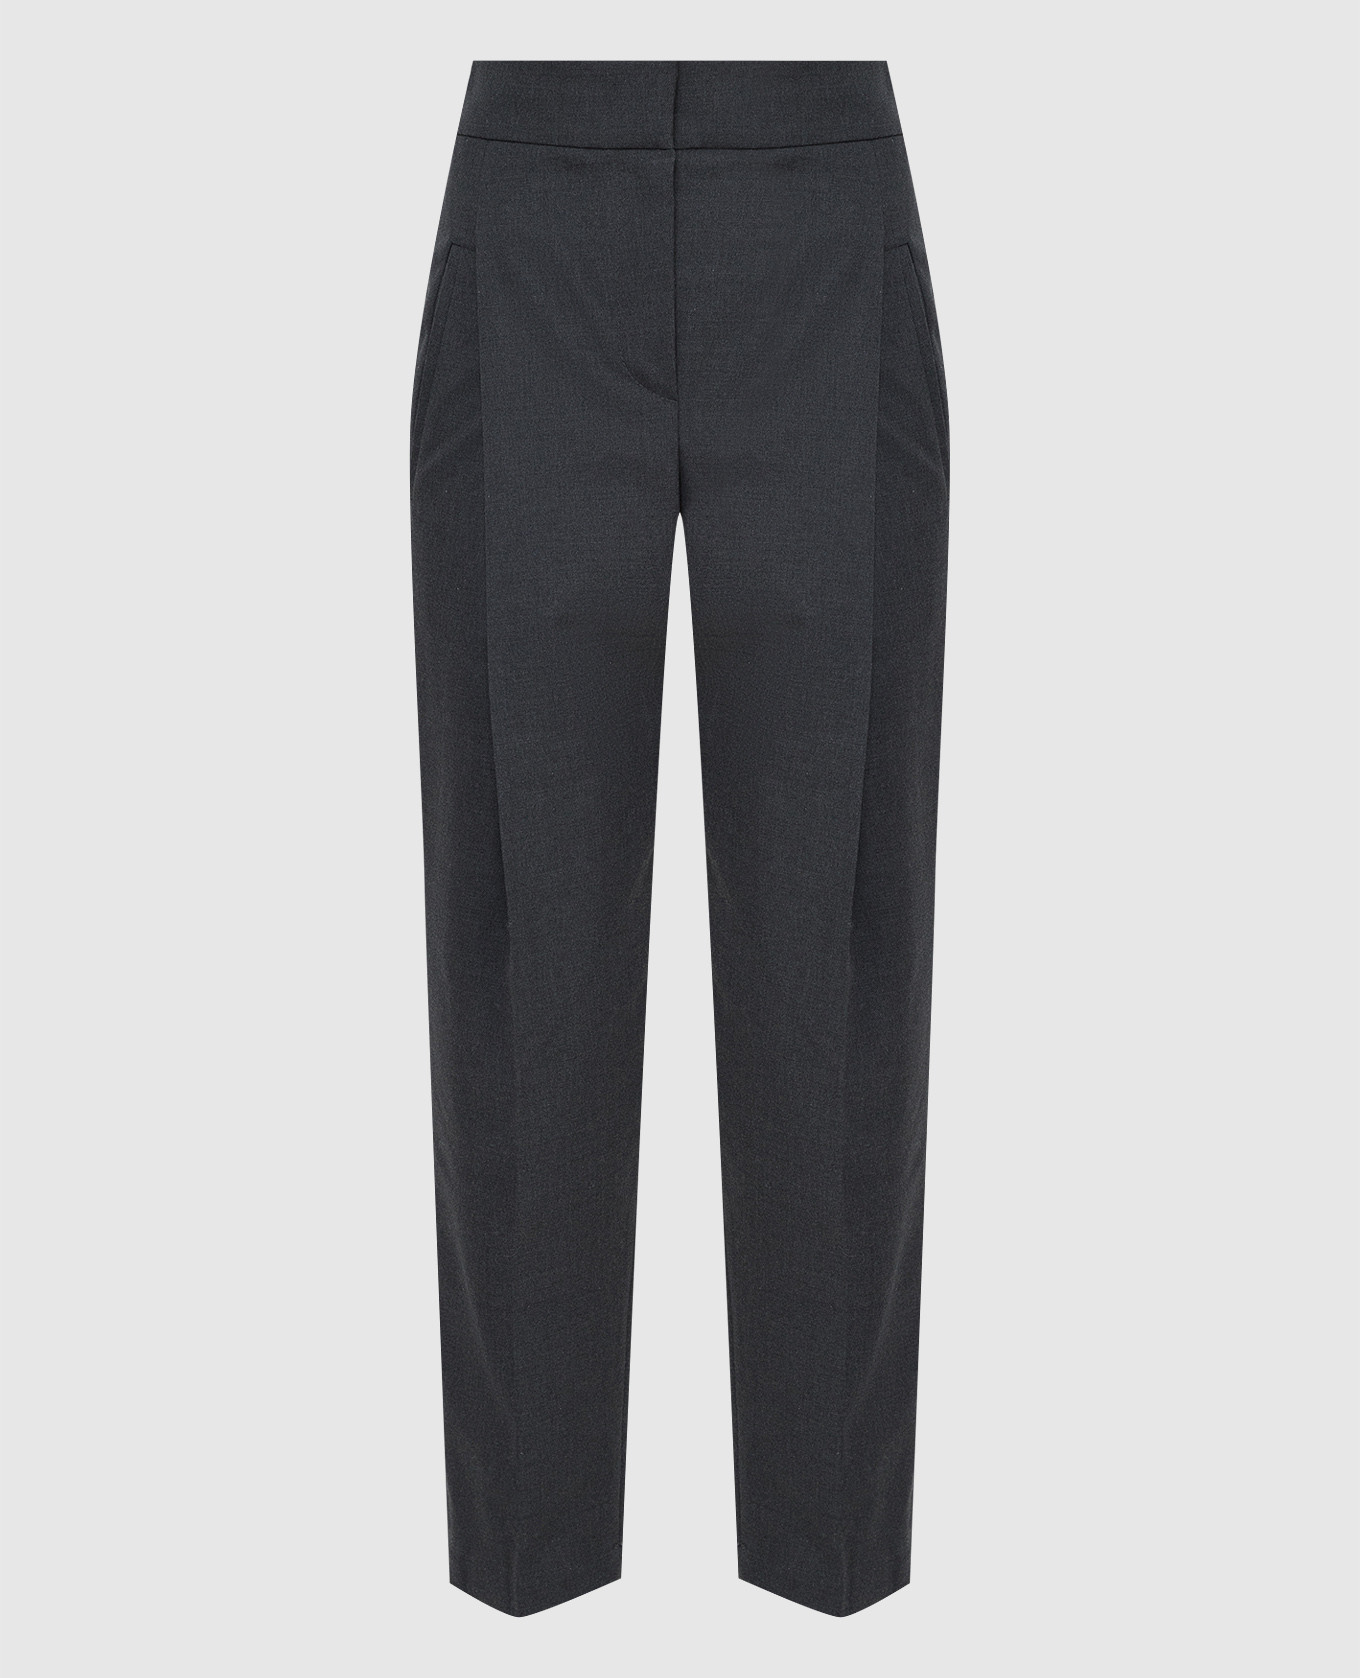 Charcoal pleated trousers